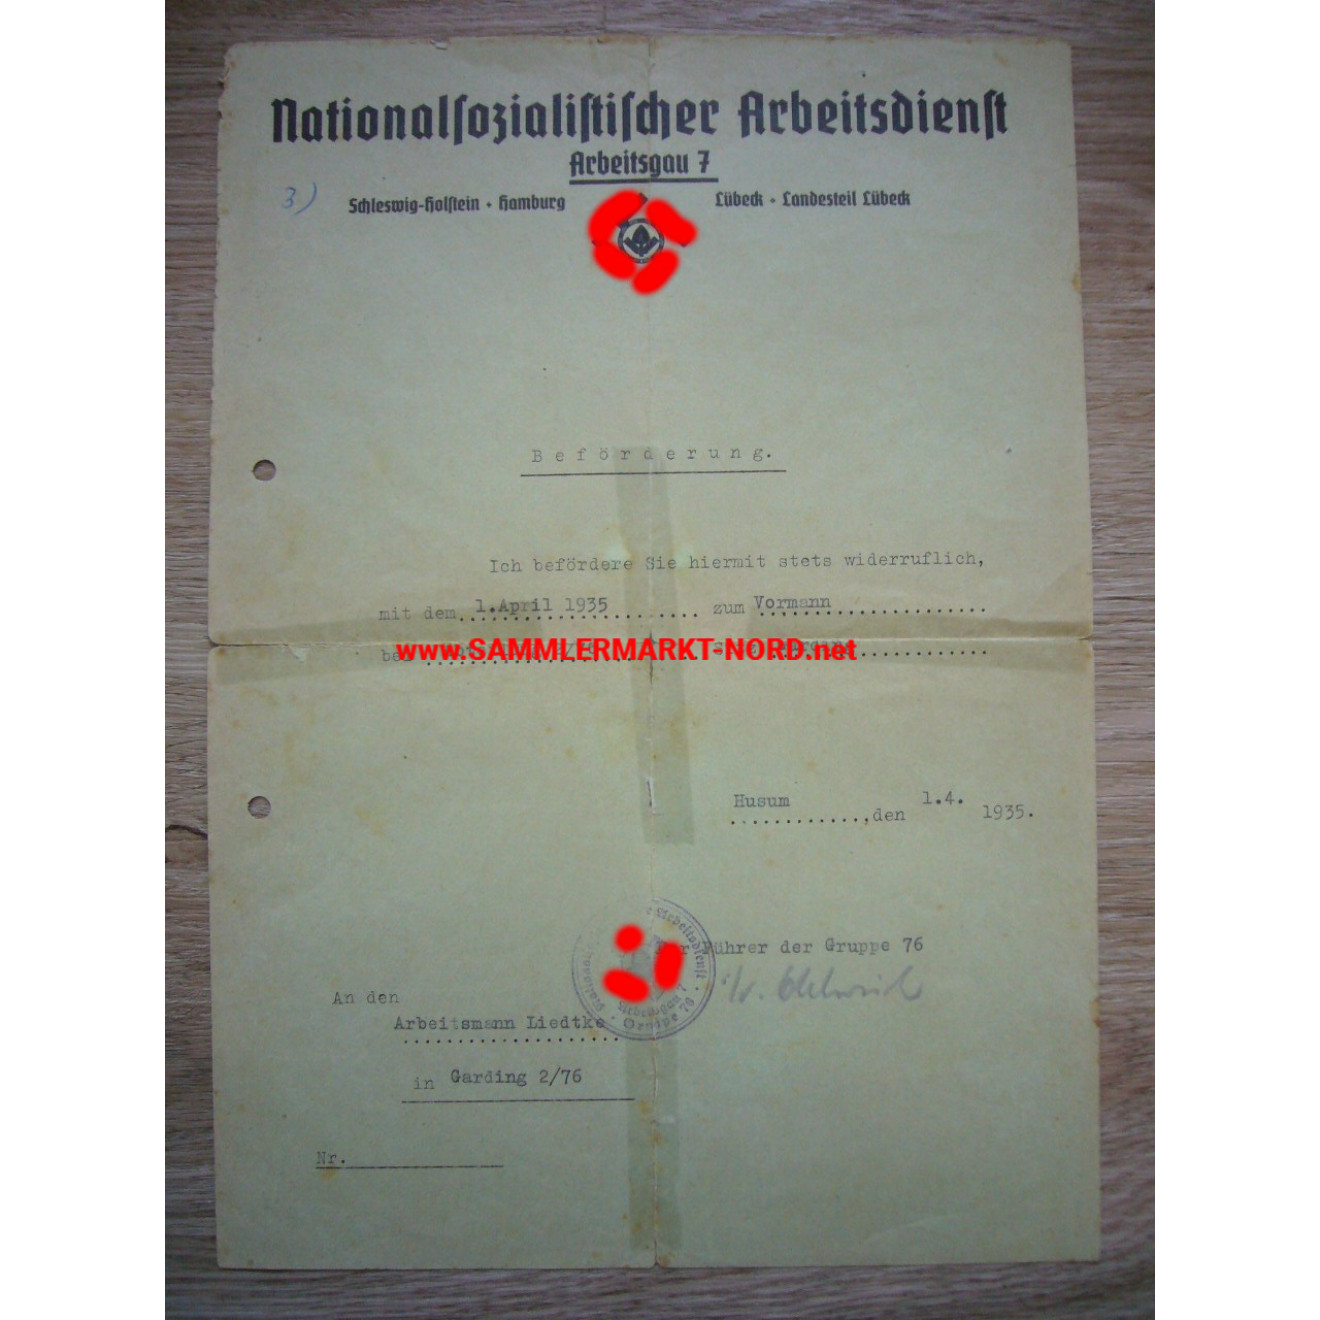 NS Labour Service, Arbeitsgau 7 - Promotion certificate - 1935